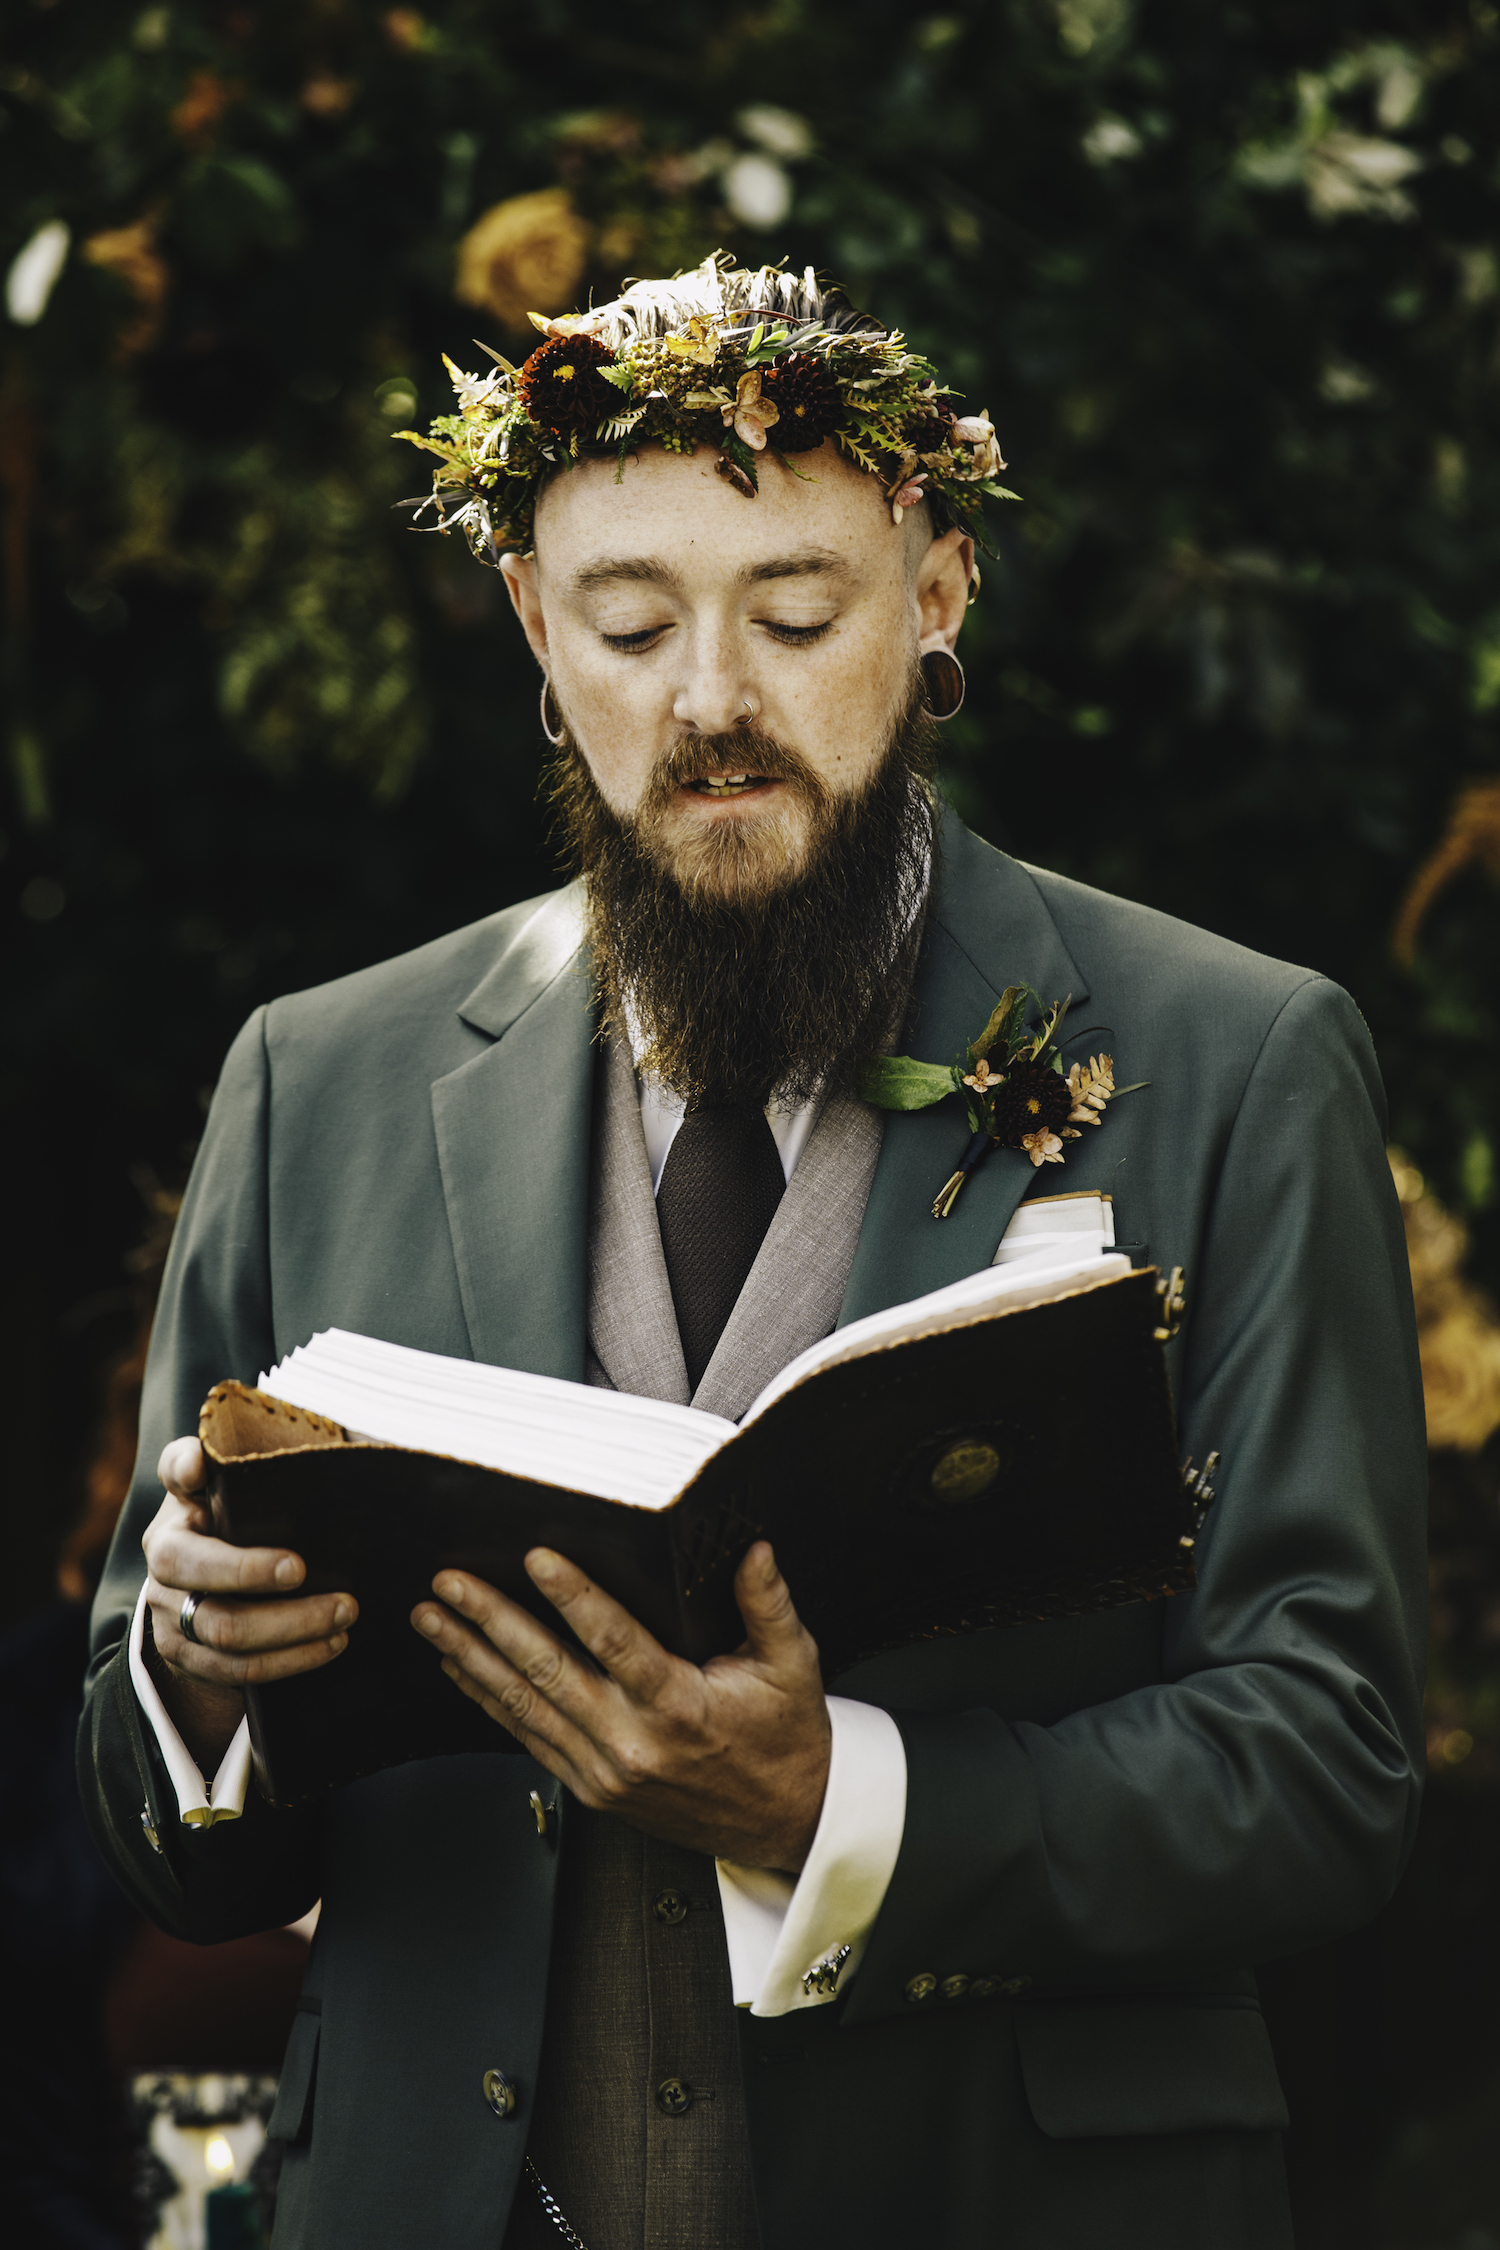 Groom reading from book